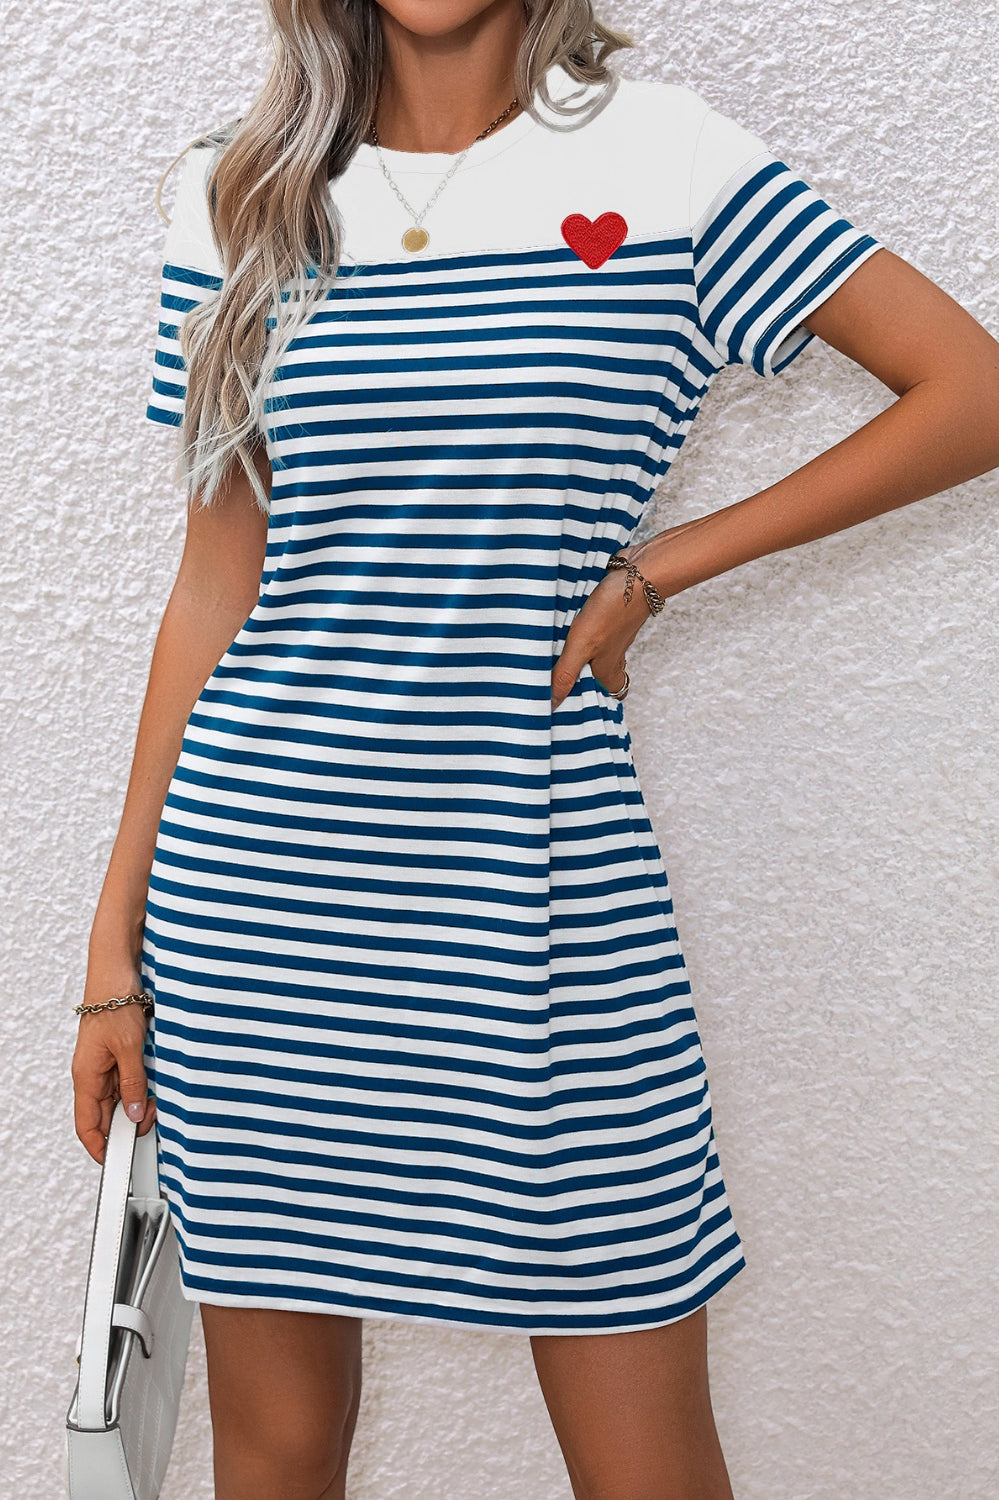 Striped Round Neck Short Sleeve Mini Tee Dress Casual Chic Boutique